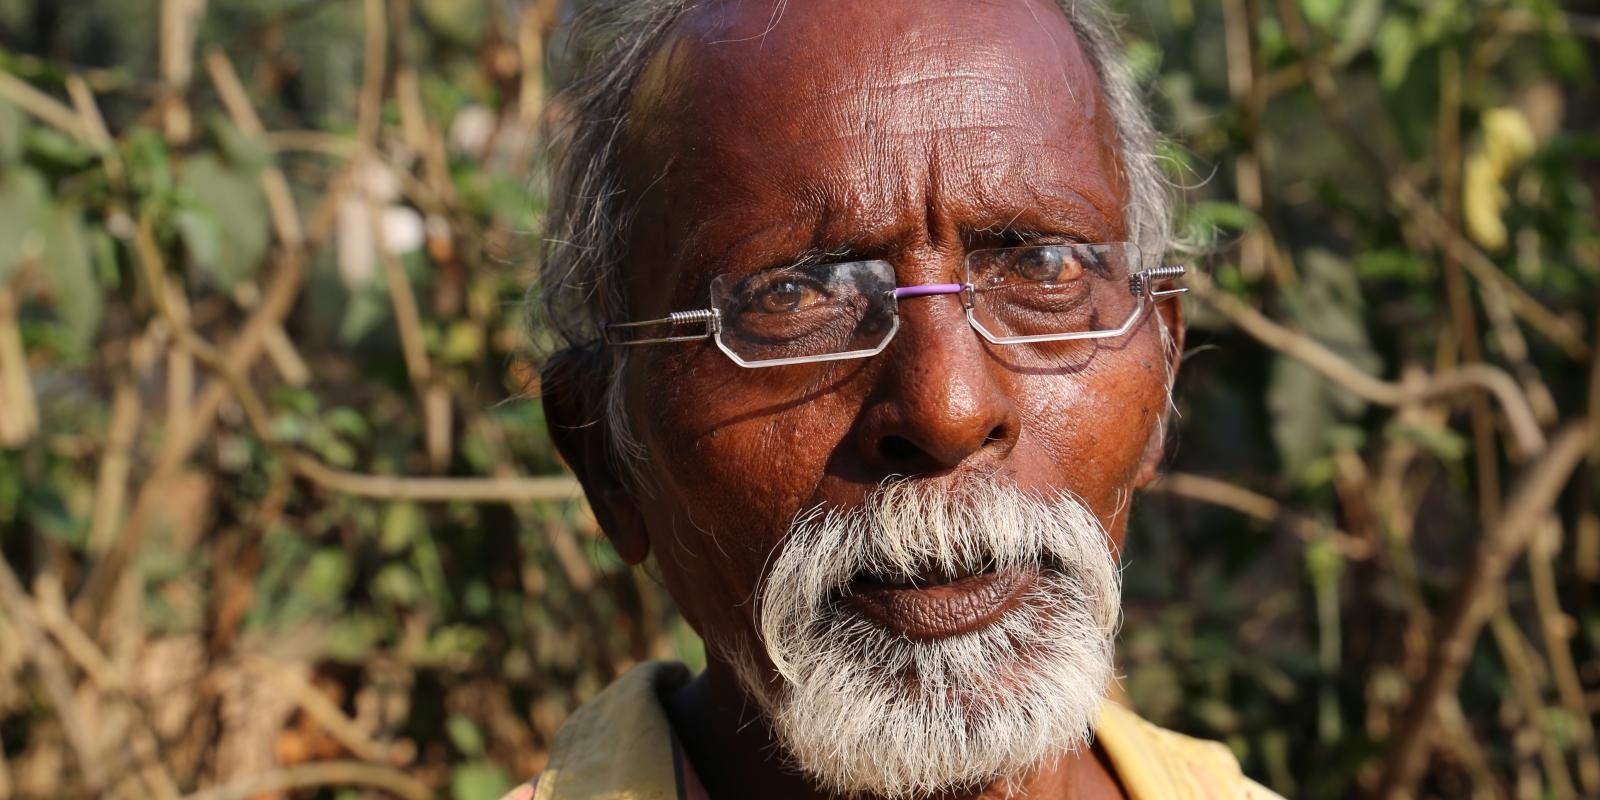 Man from India with OneDollarGlasses